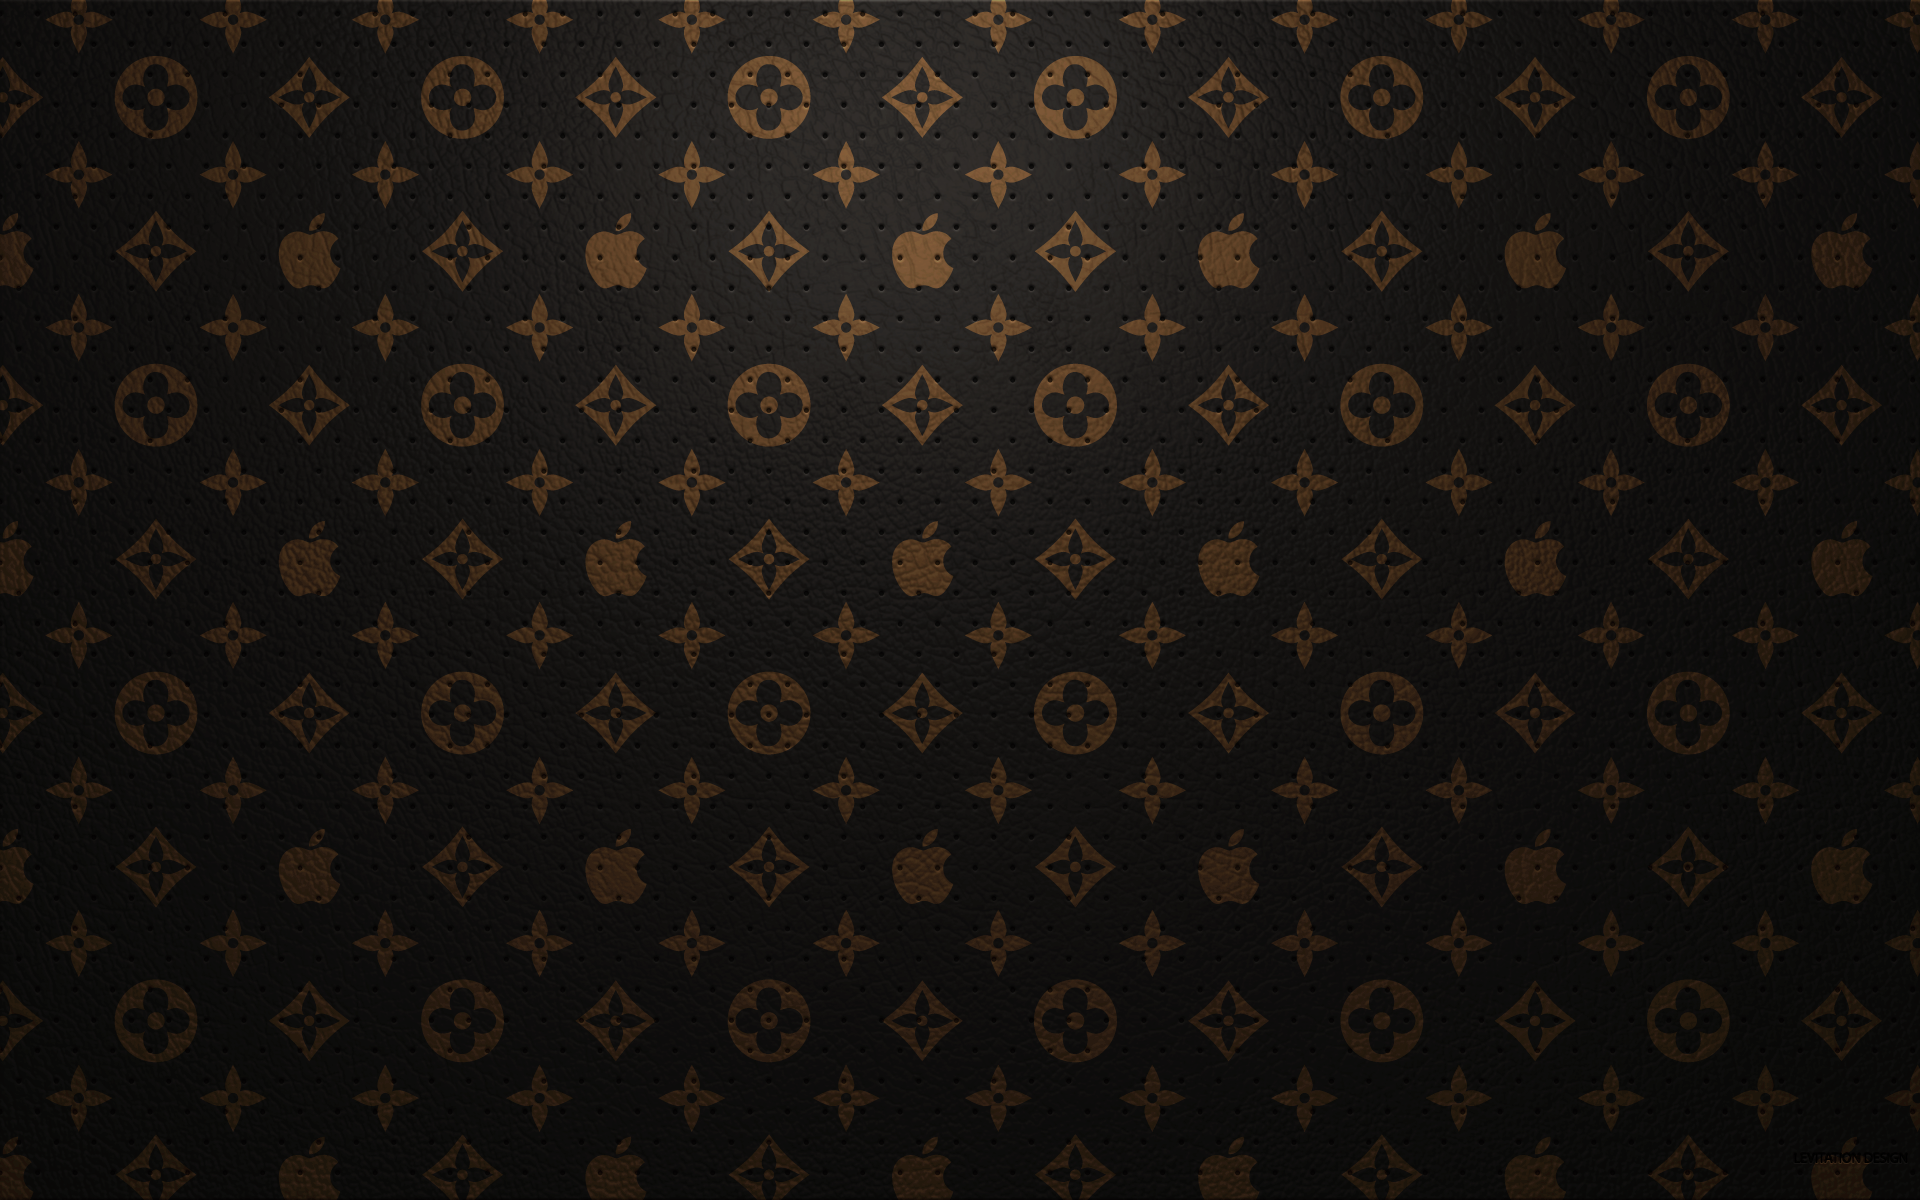 LV Black On Dog - Black And Gold Louis Vuitton HD wallpaper